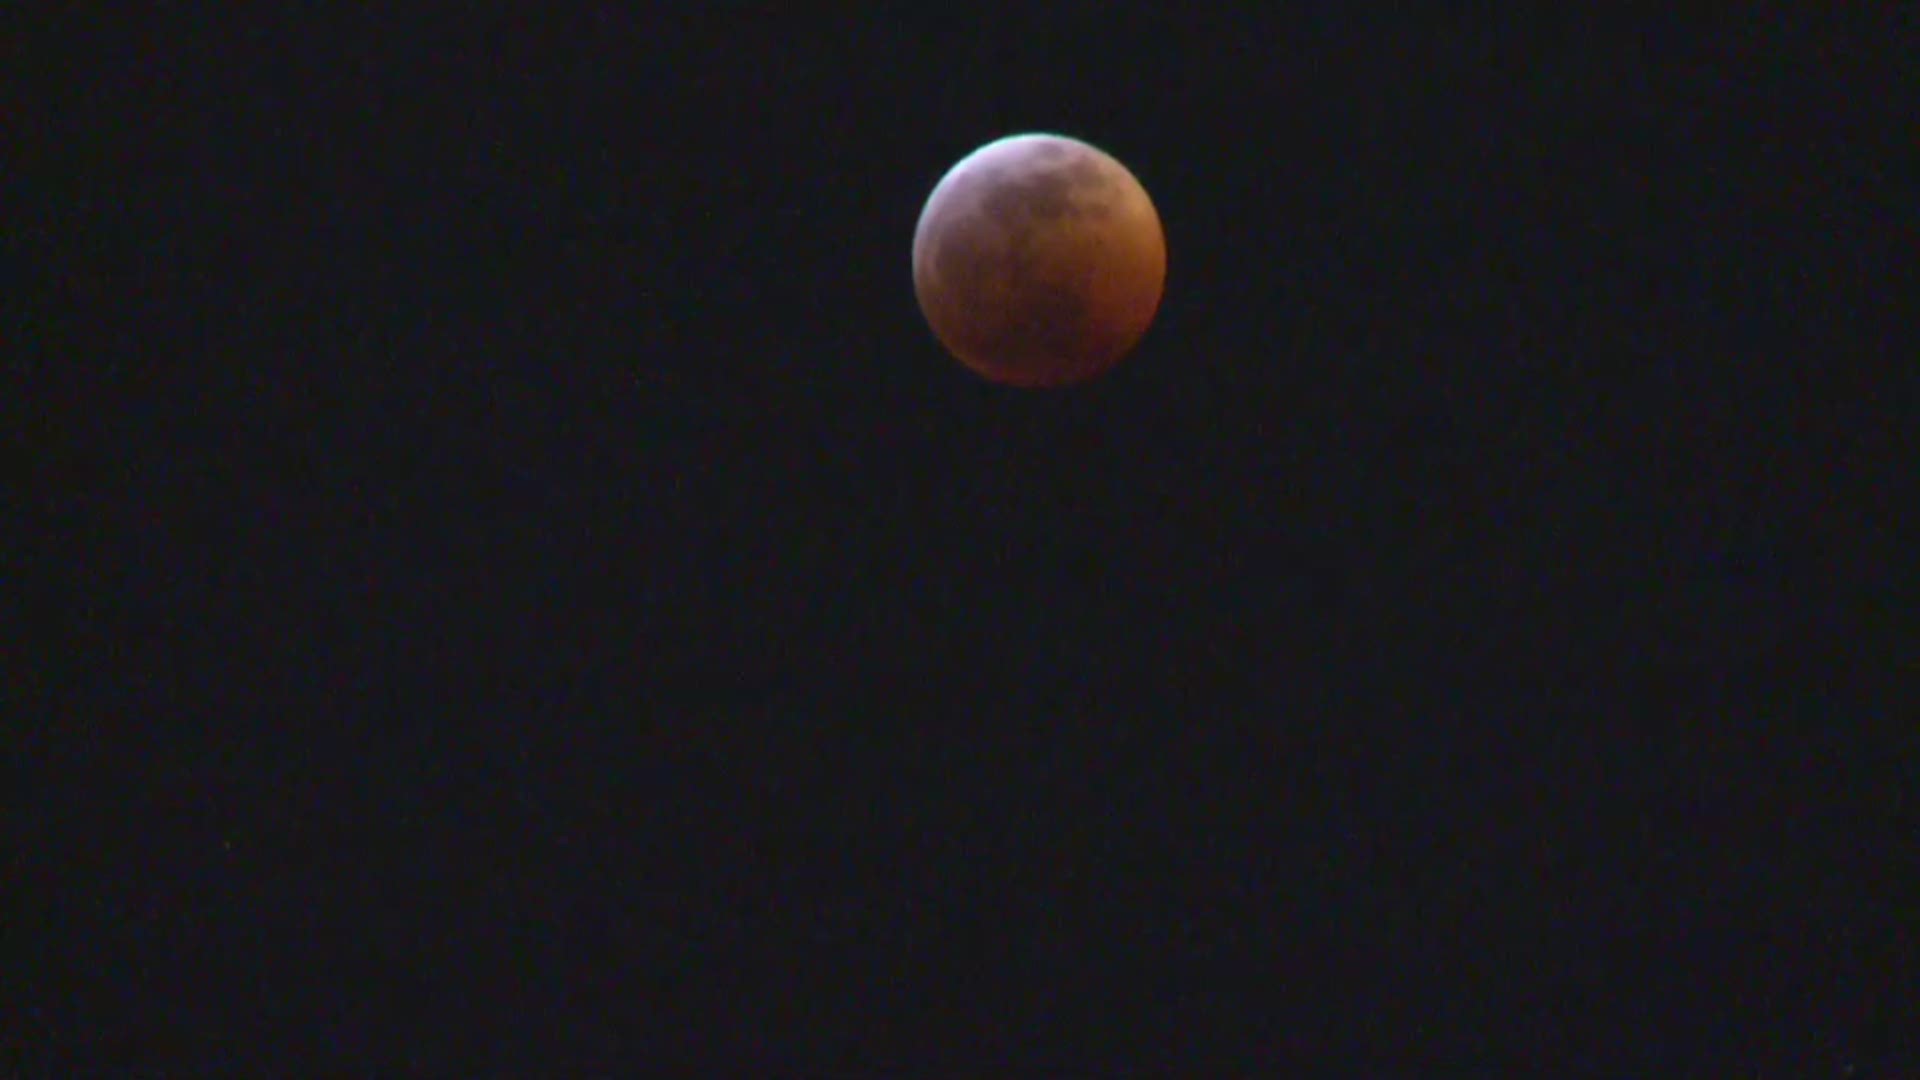 Sunday night's well-hyped 'Super Blood Wolf Moon Eclipse' was well worth the hype and wait.